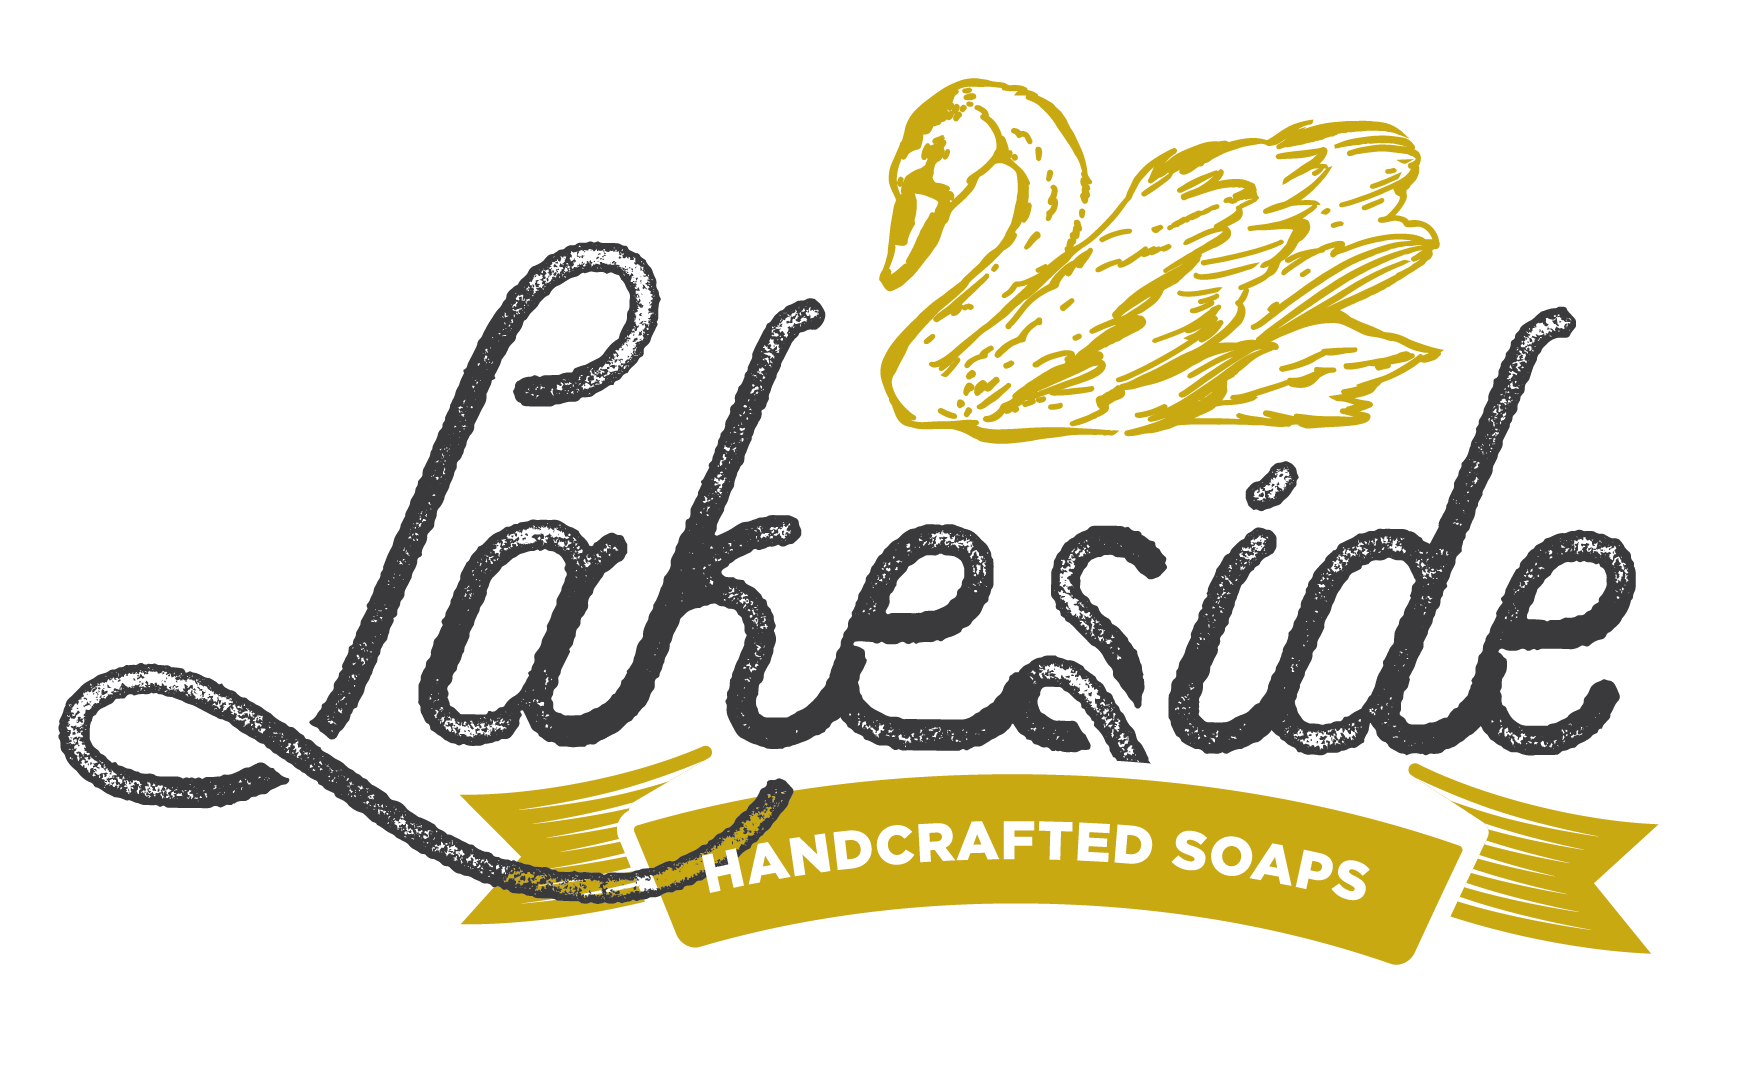 Lakeside Handcrafted Soaps